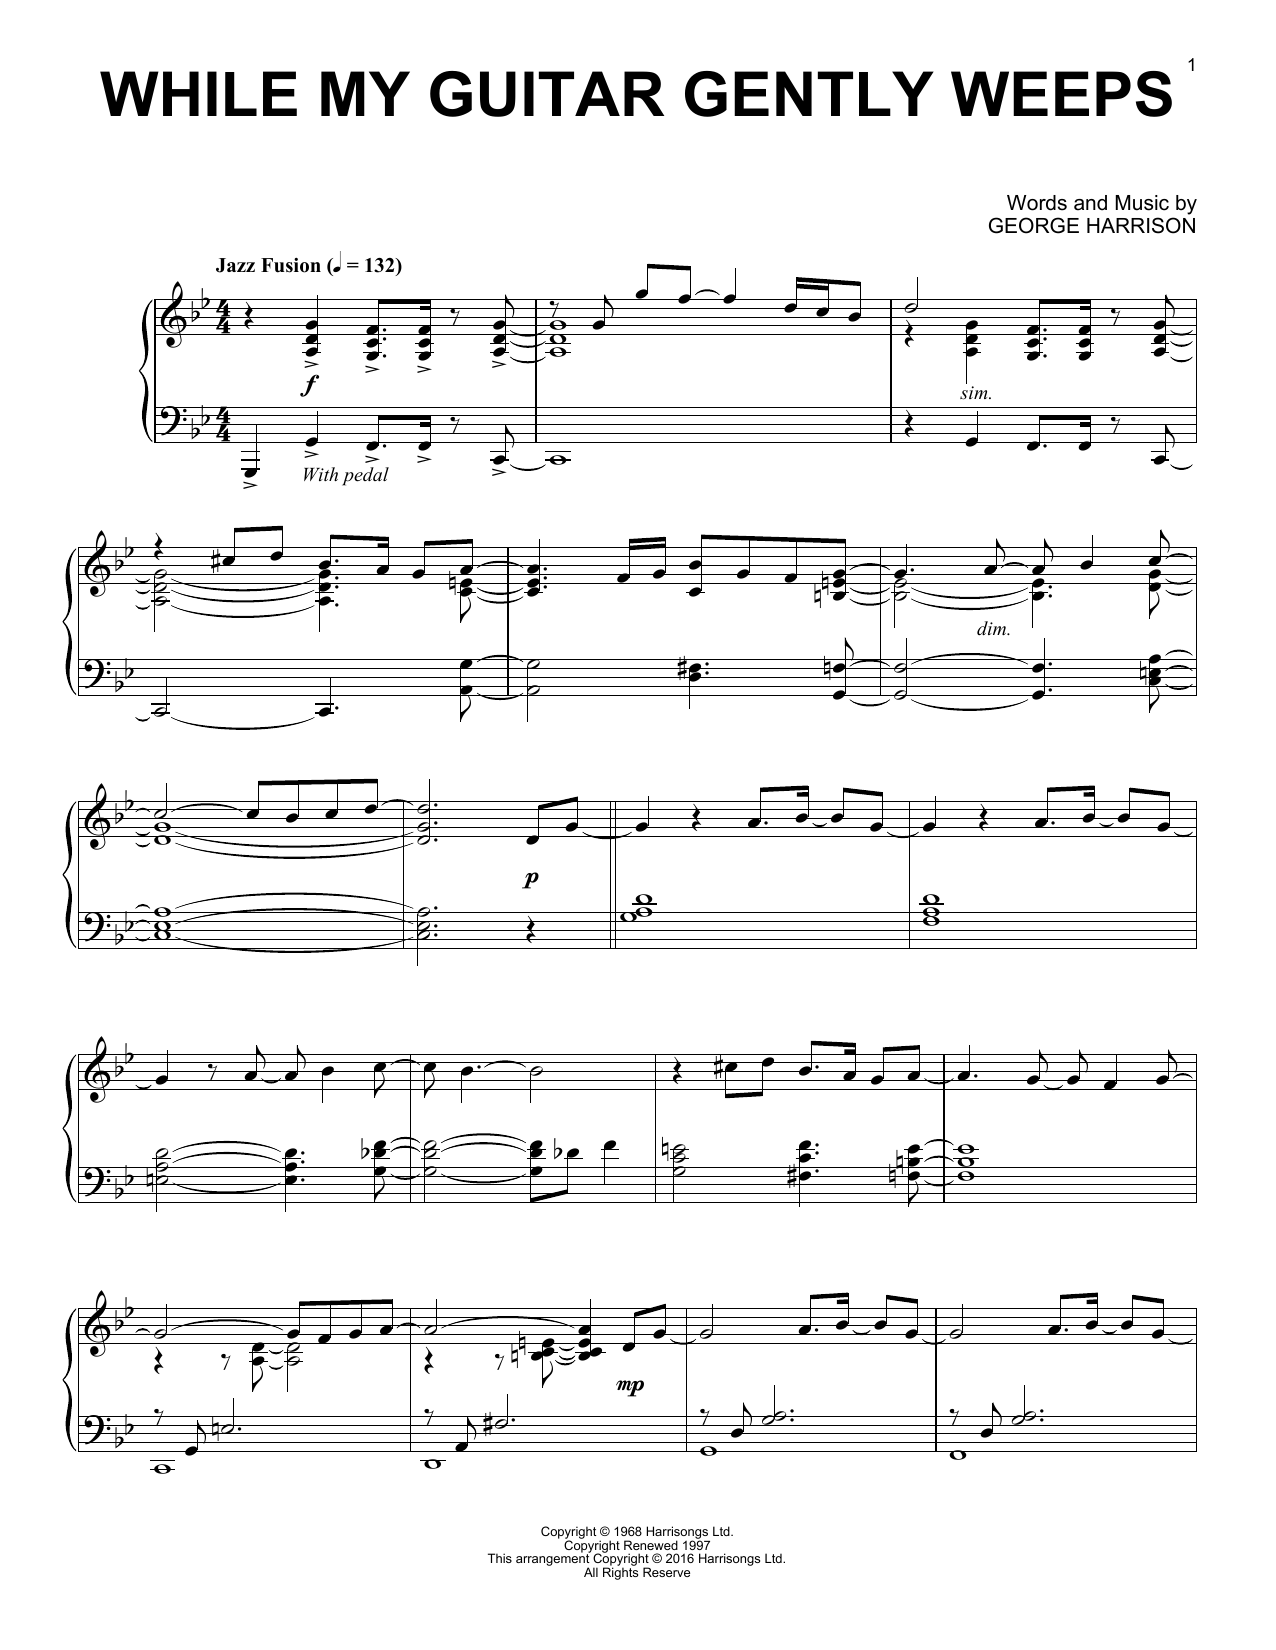 The Beatles "While My Guitar Gently Weeps [Jazz version]" Sheet Music Notes  | Download Printable PDF Score 176031